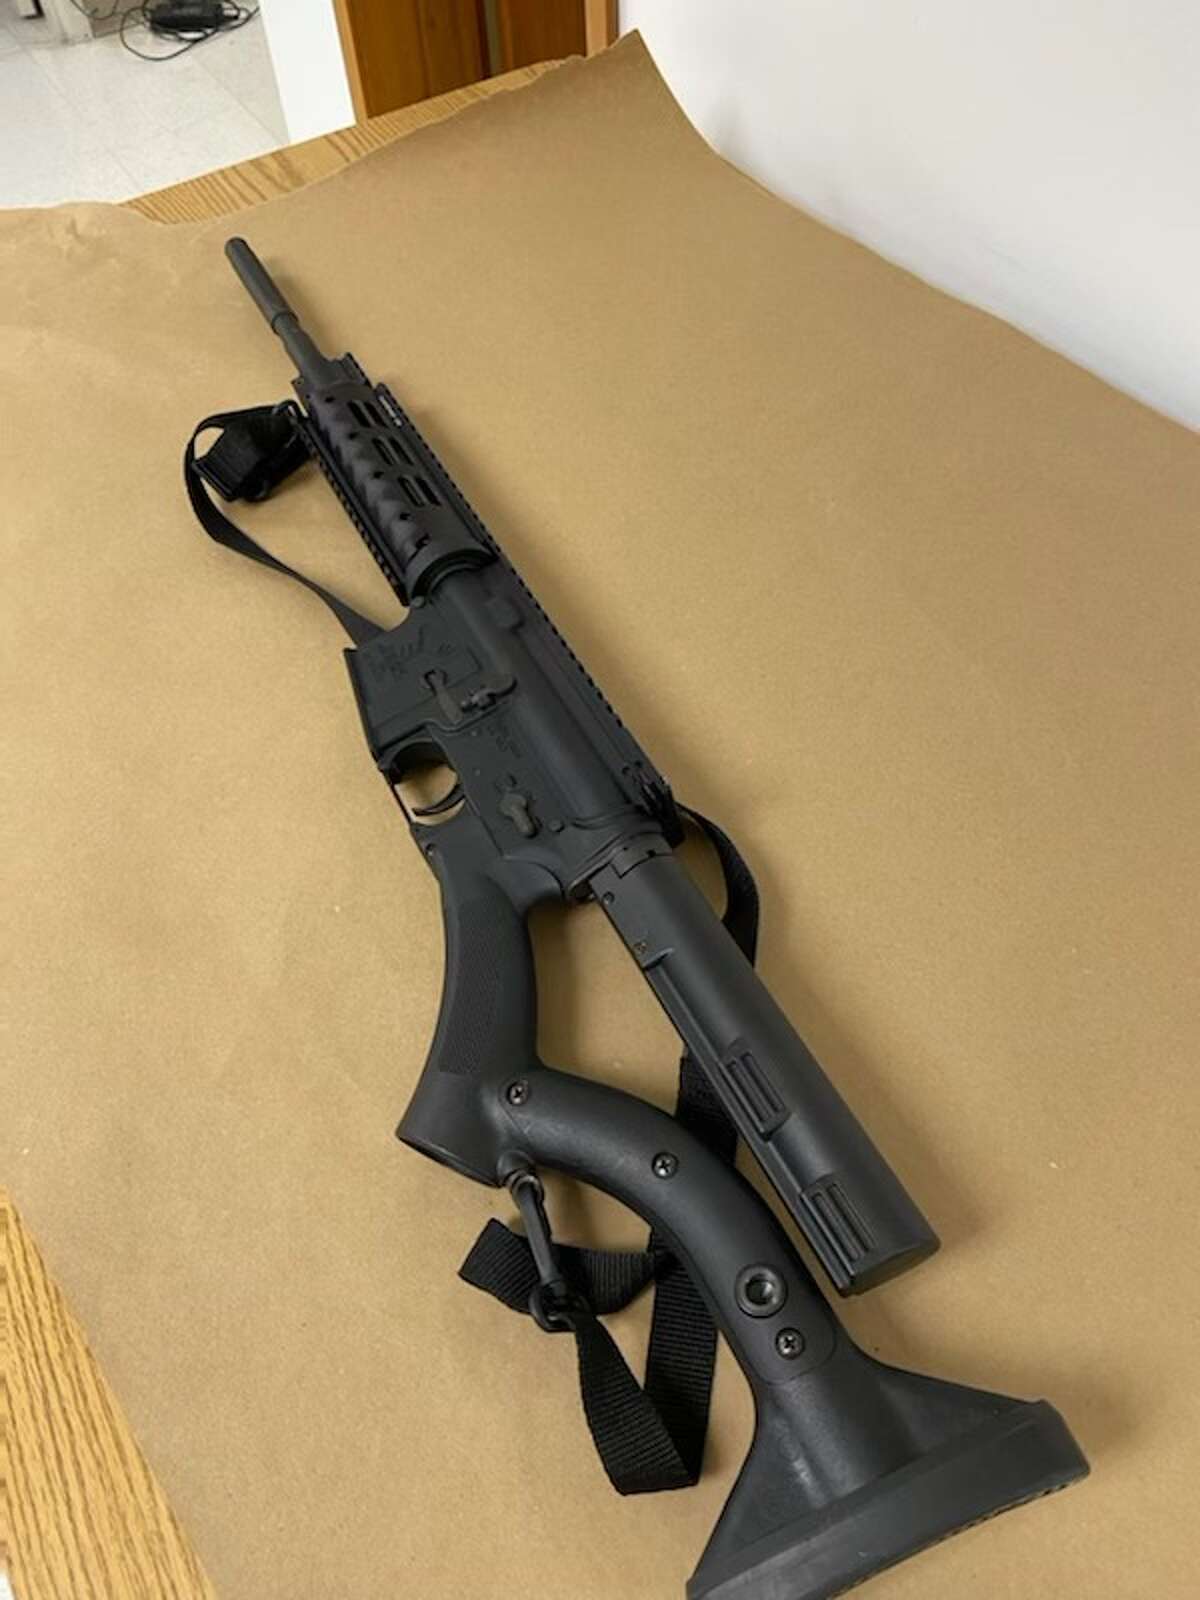 This is the AR-15 recovered Friday night Nov. 12, 2021 from an incident at a Myrtle Avenue apartment in Albany.